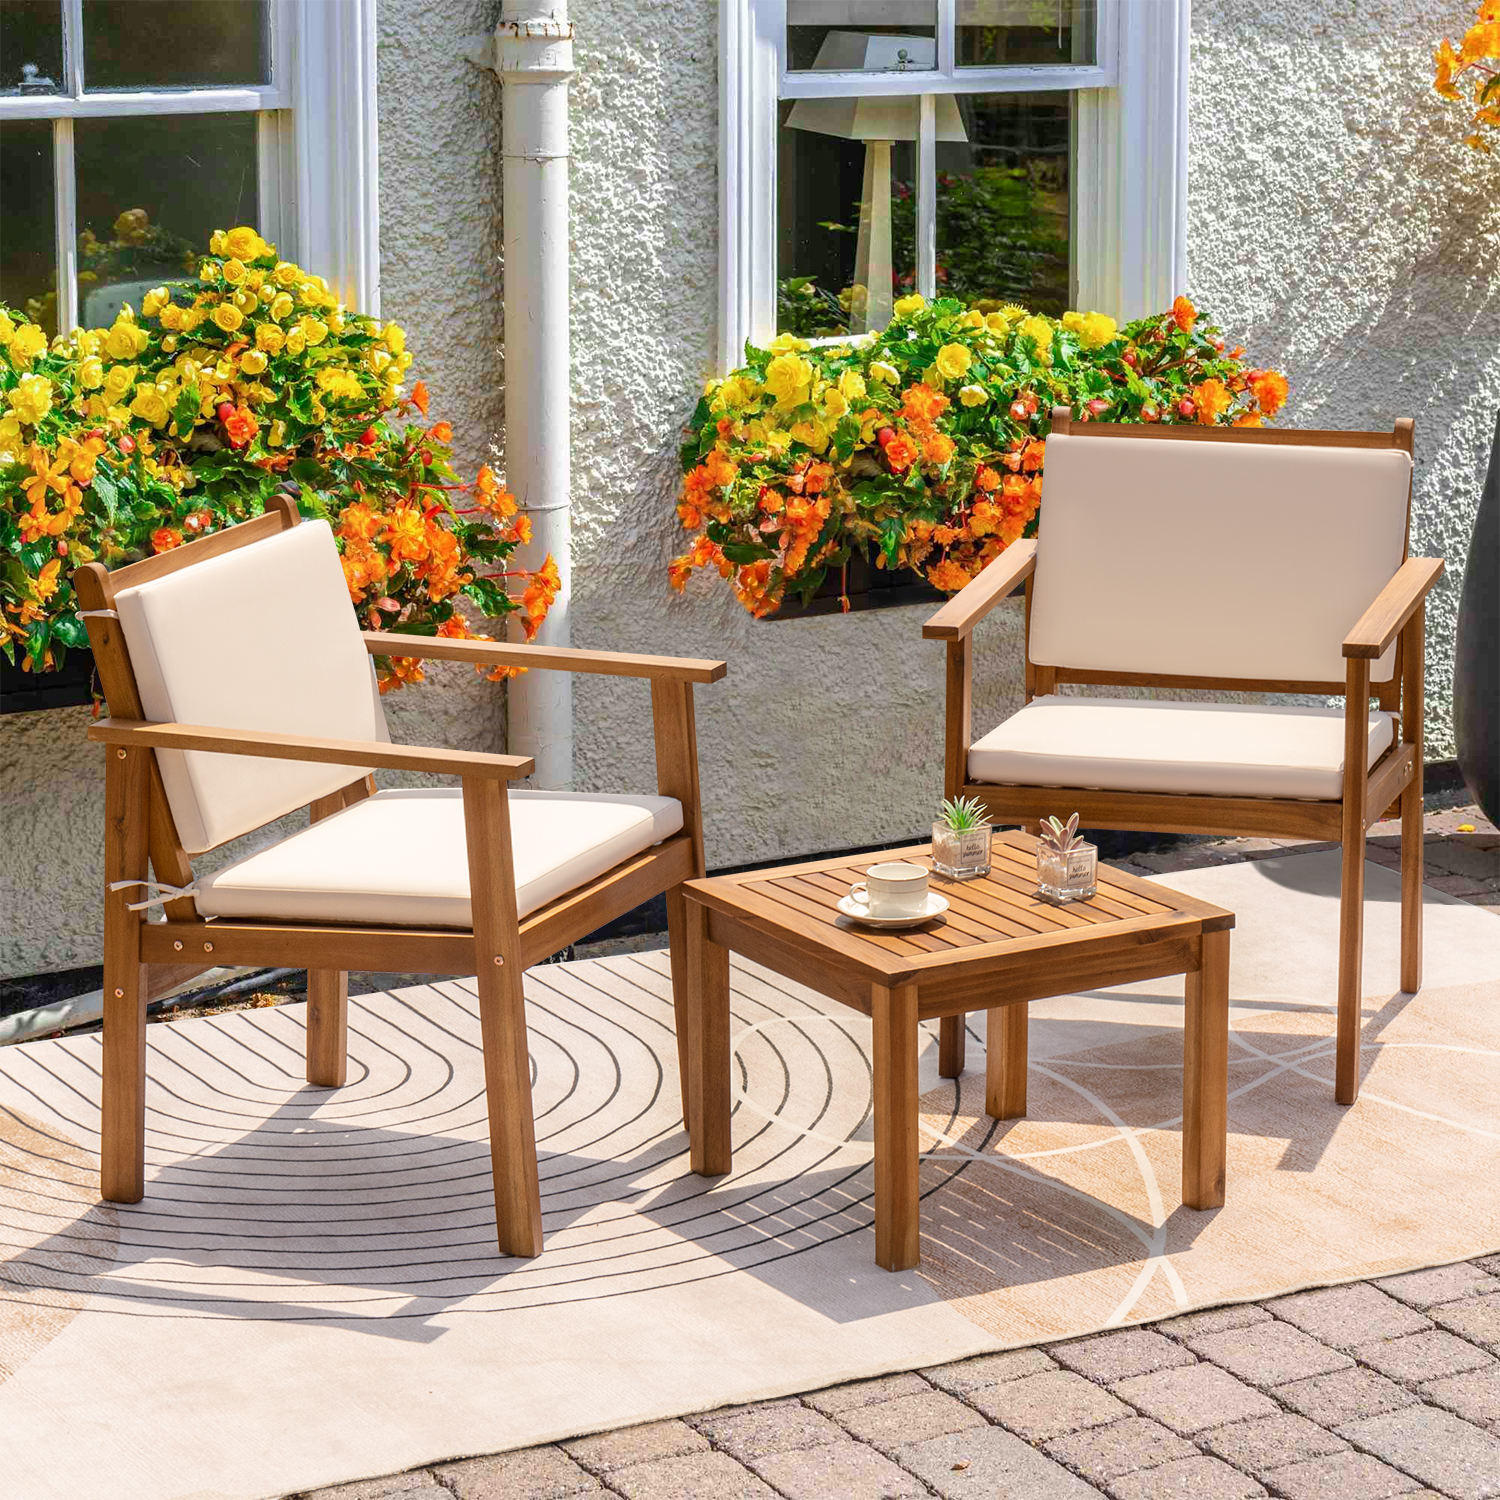 Devoko 3 Pieces Acacia Patio Conversation Set Outdoor Furniture Set with Cushions and Side Table for Porch, Yard and Balcony, Beige - image 5 of 7